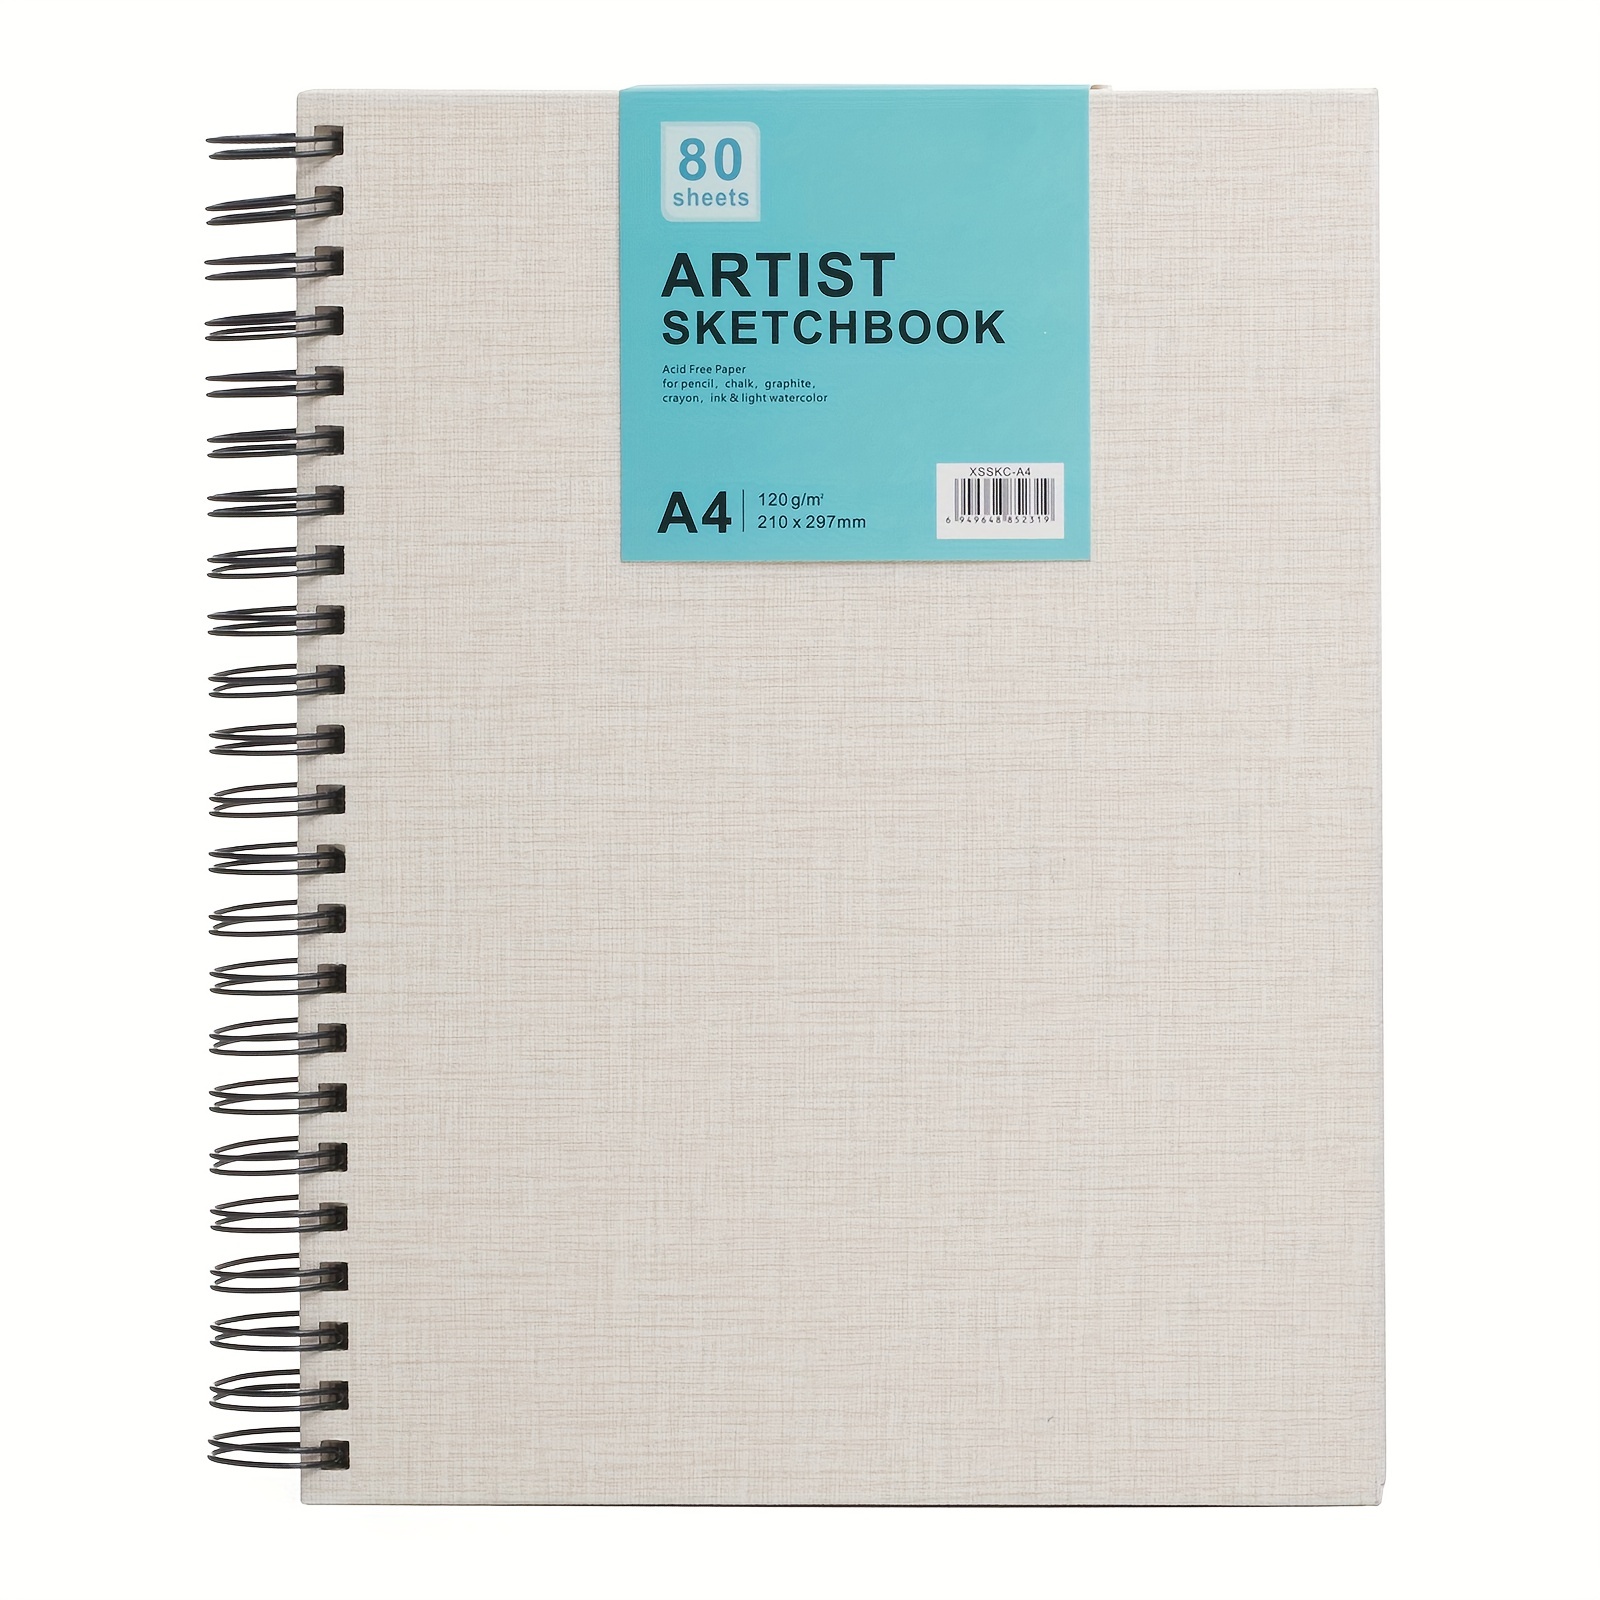 Sketch Book: Large Notebook for Drawing, Doodling or Sketching: 120 Pages,  8.5 x 11. Inspiring Background Cover Sketchbook Blank Paper Drawing and